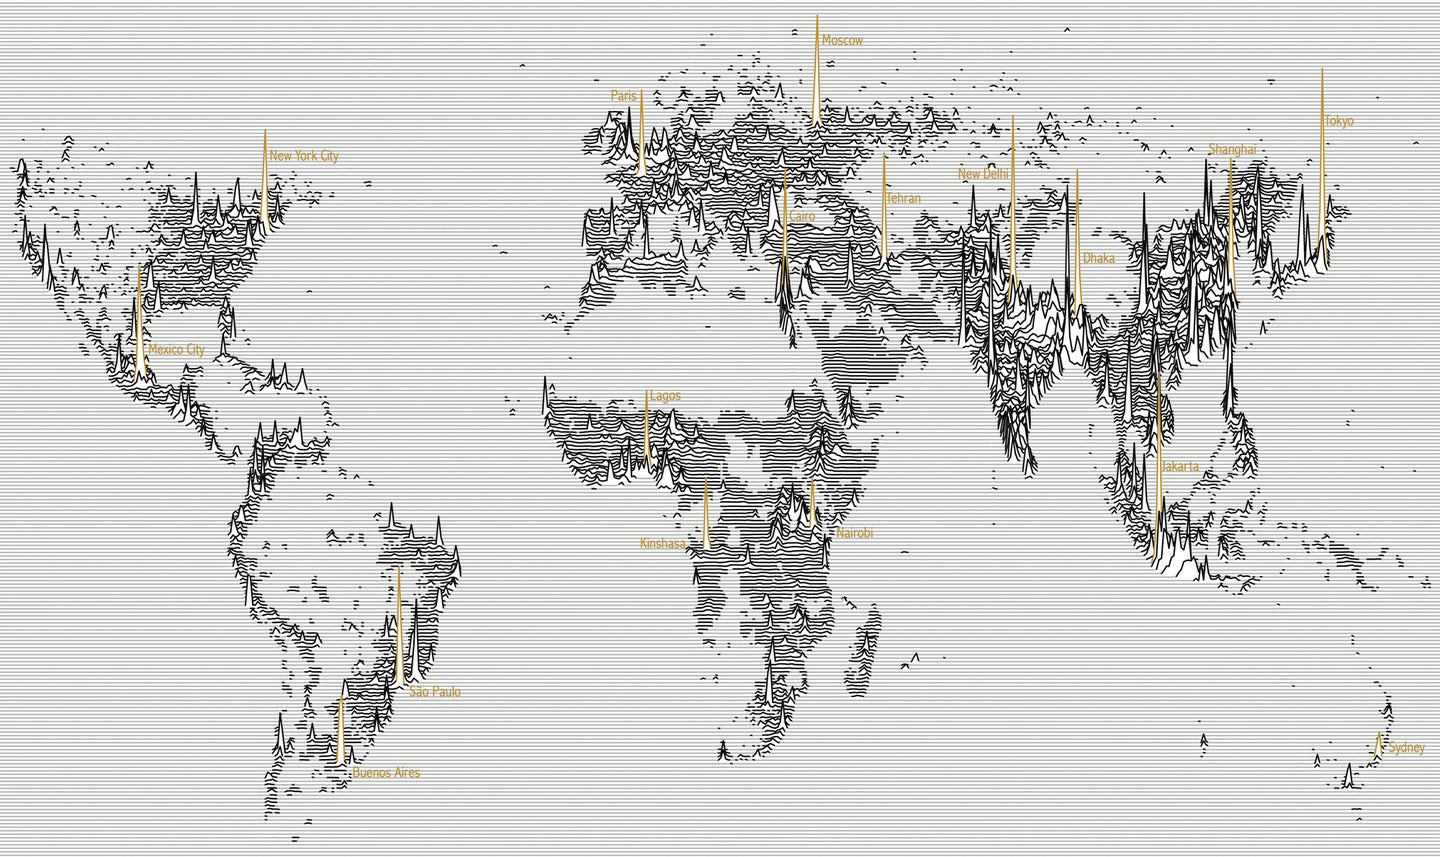 World Population Mapped As Peaks And Valleys